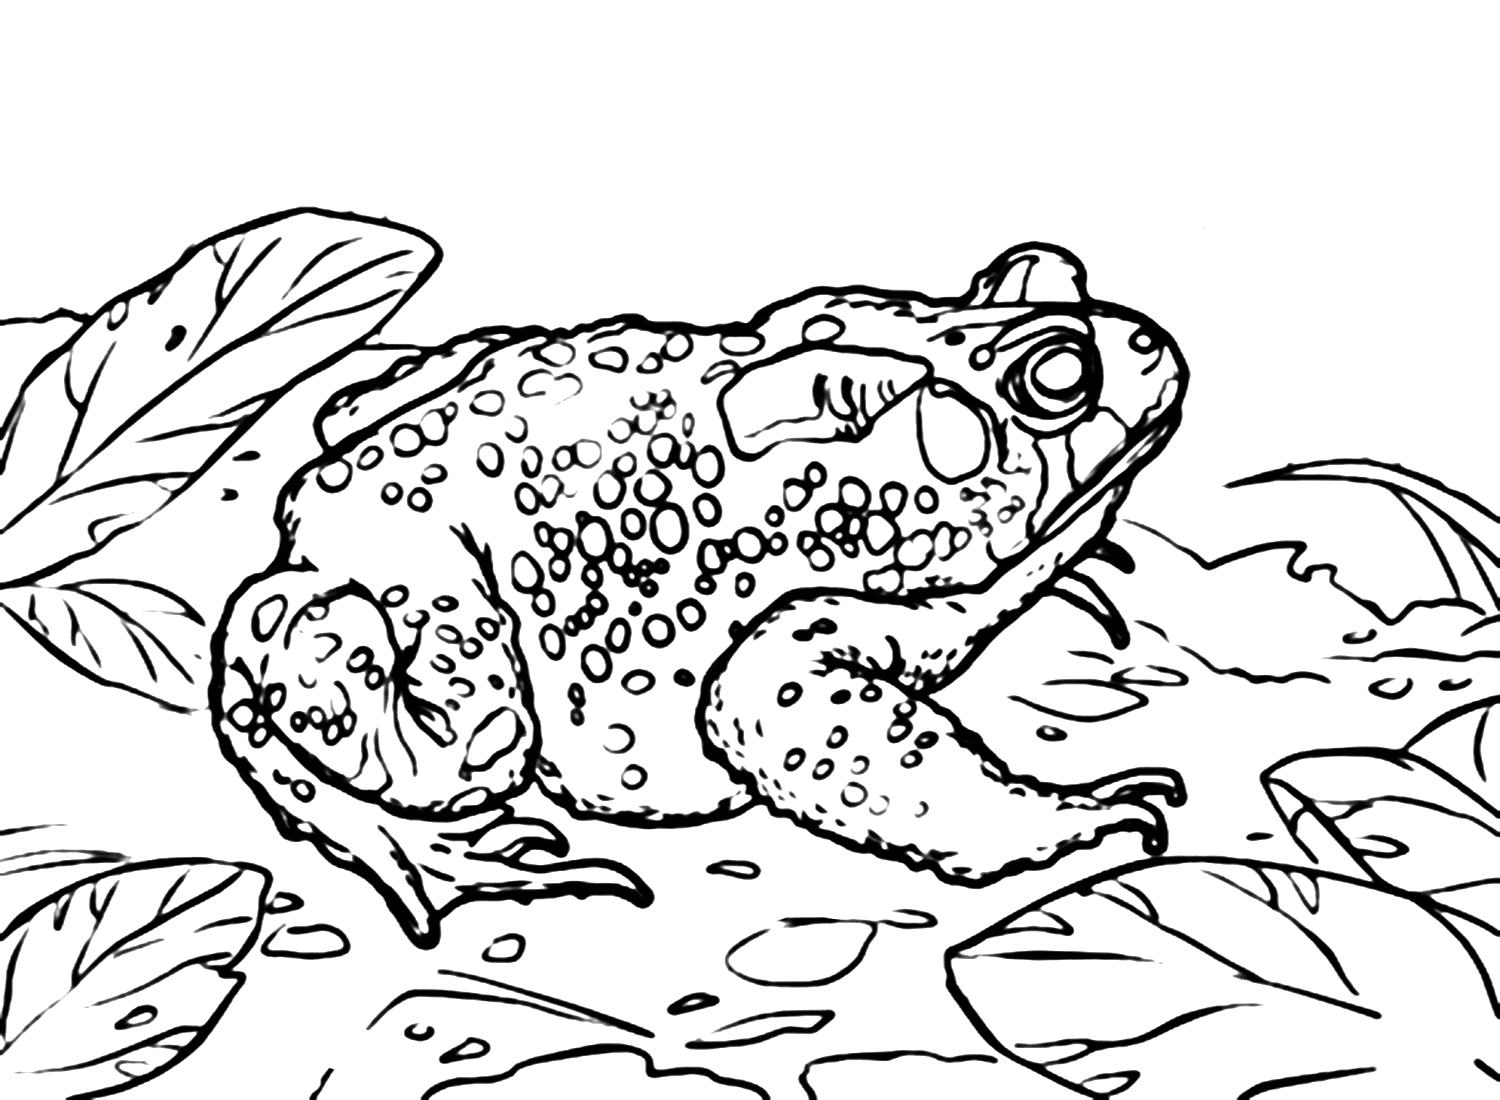 American Cane Toad Coloring Page